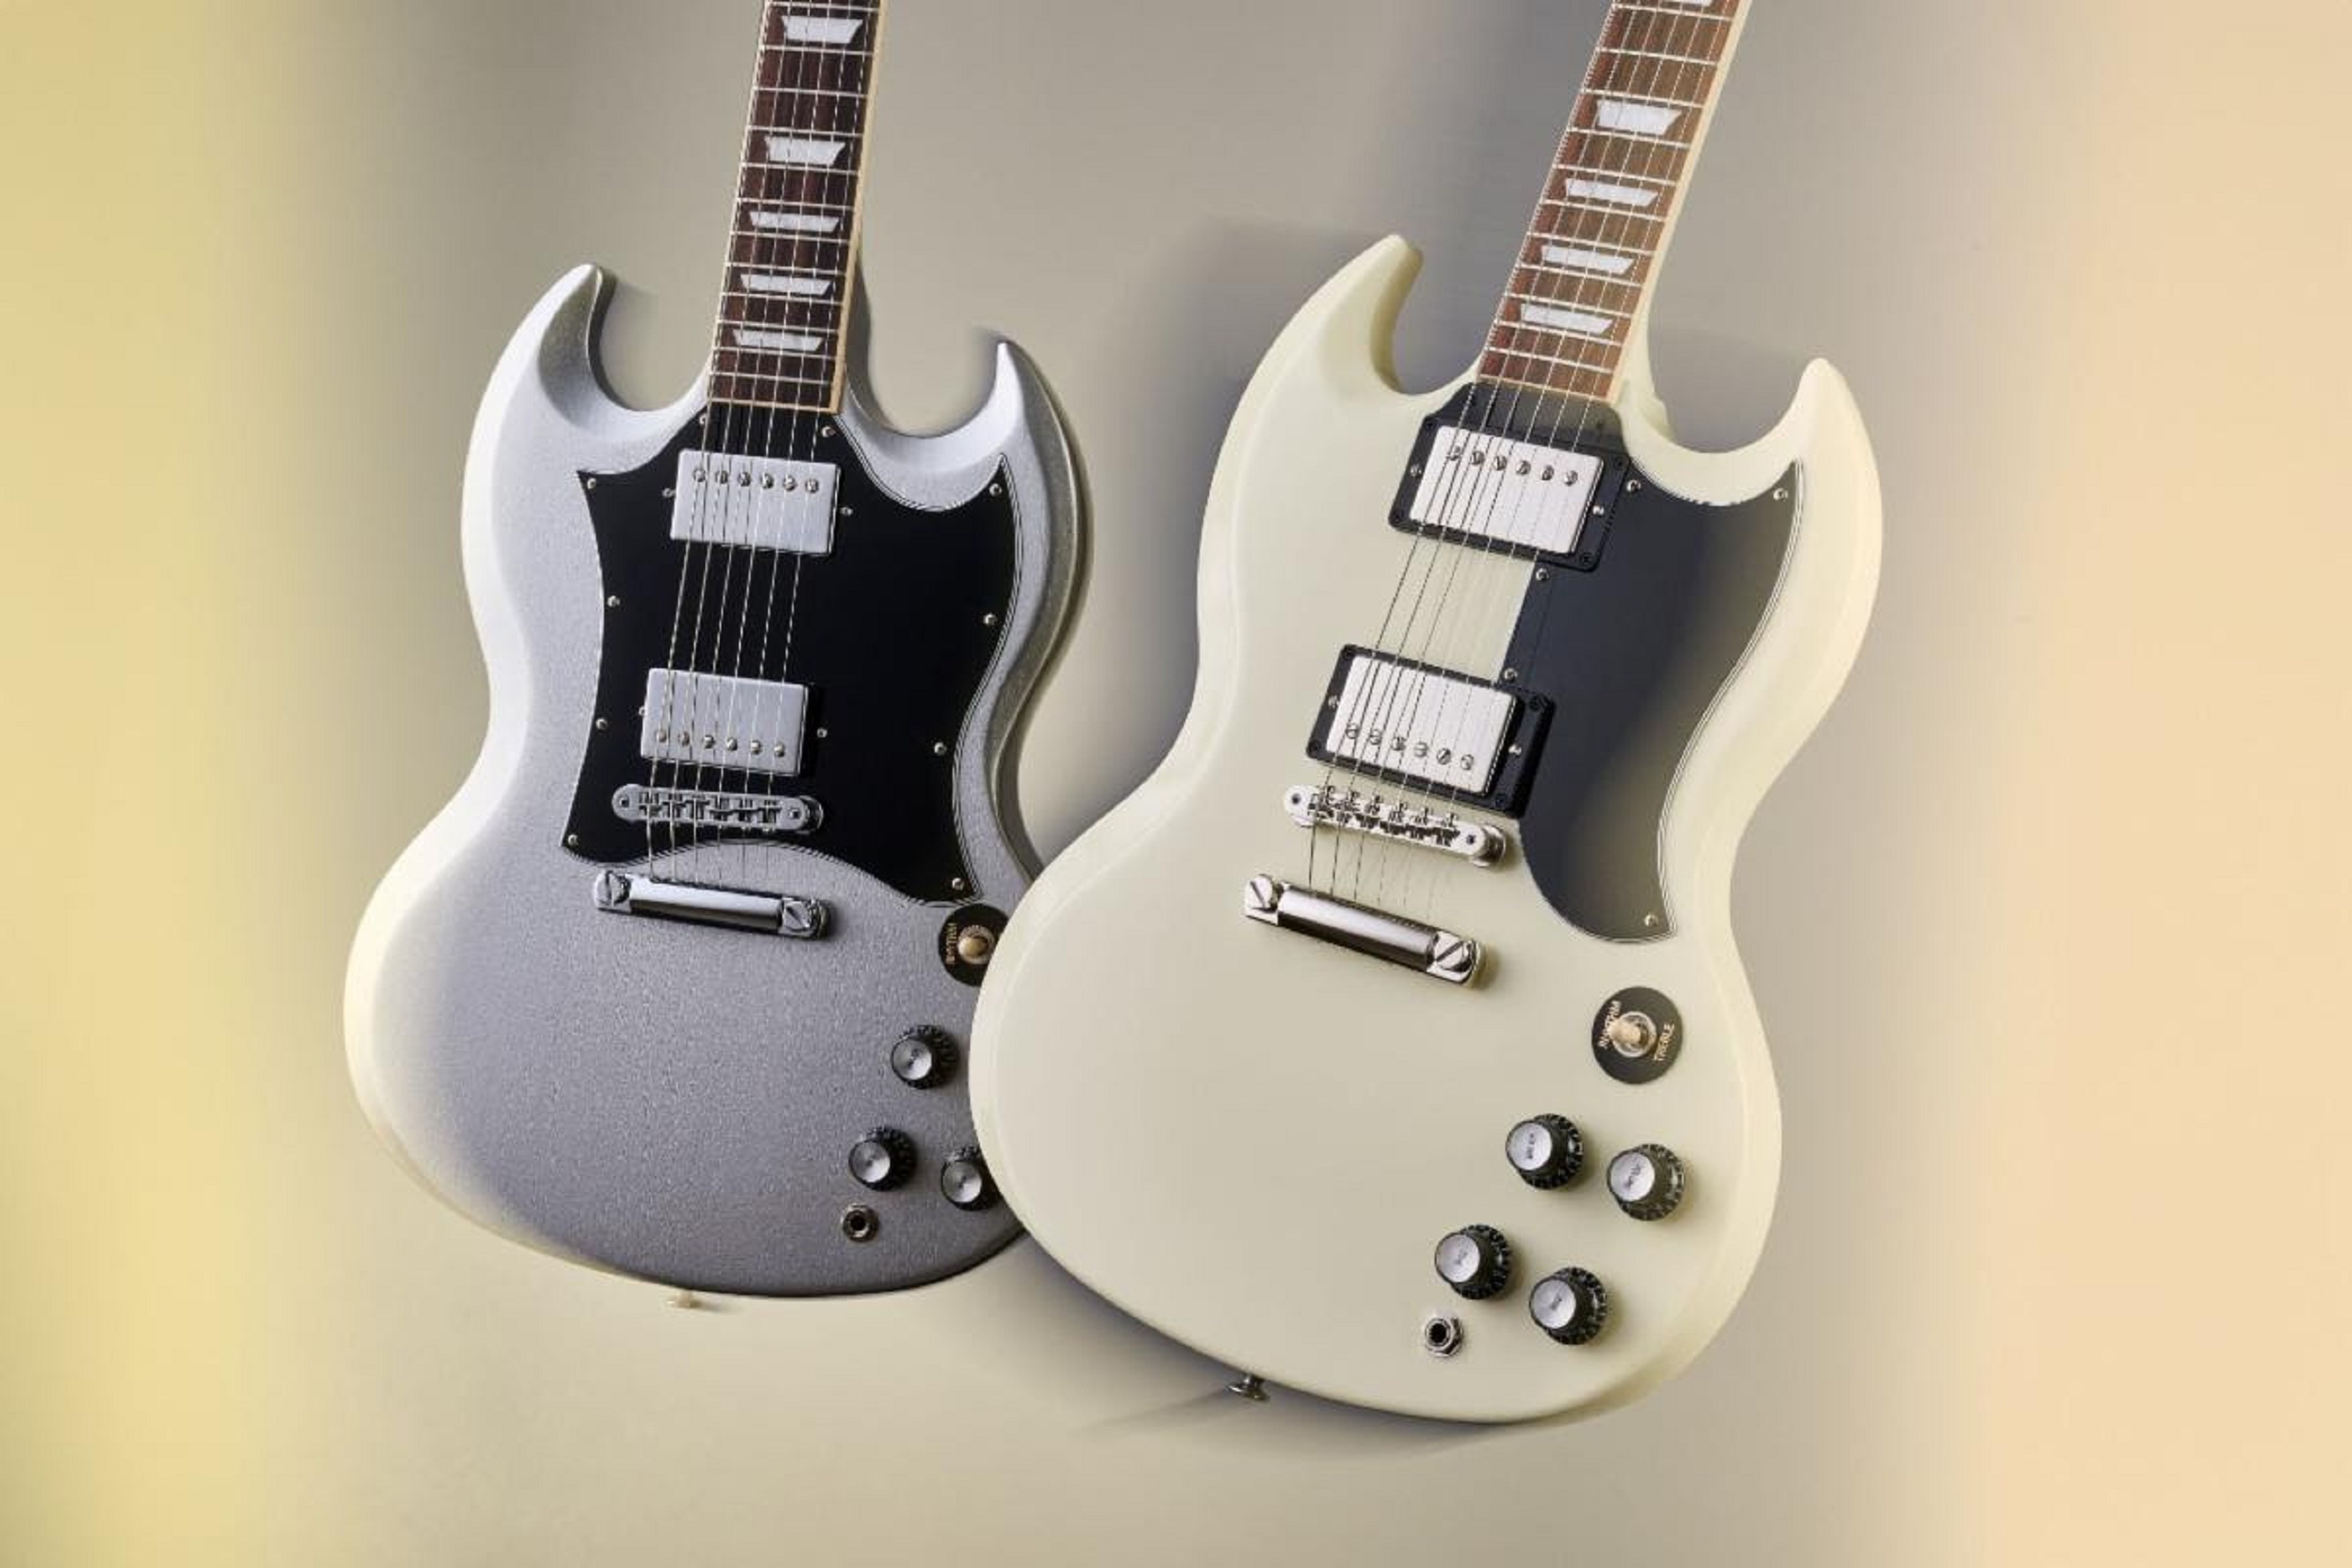 Gibson: Custom Color Series SG Standard and SG Standard ’61 Available Worldwide on Gibson.com